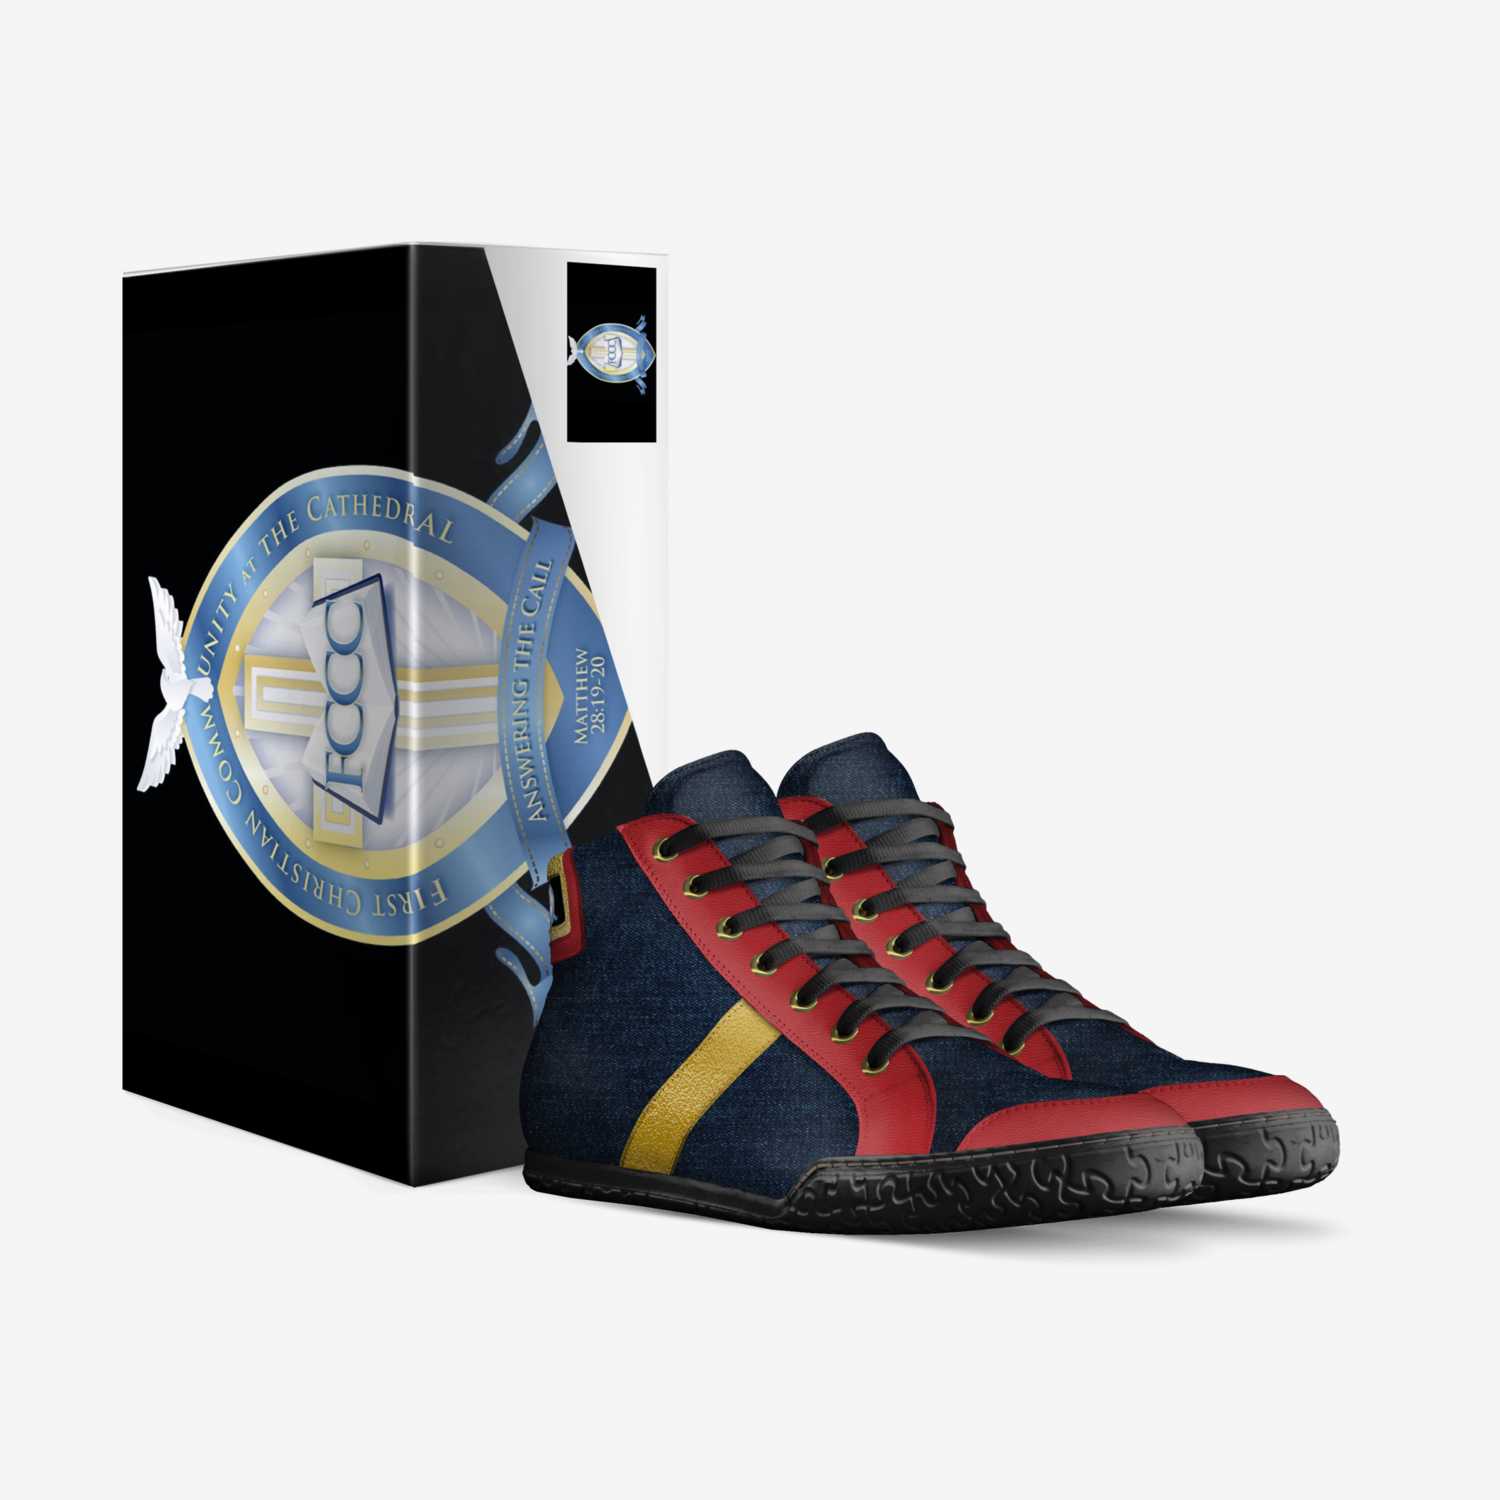 AMcCK1’s custom made in Italy shoes by Shawn Mcnair | Box view